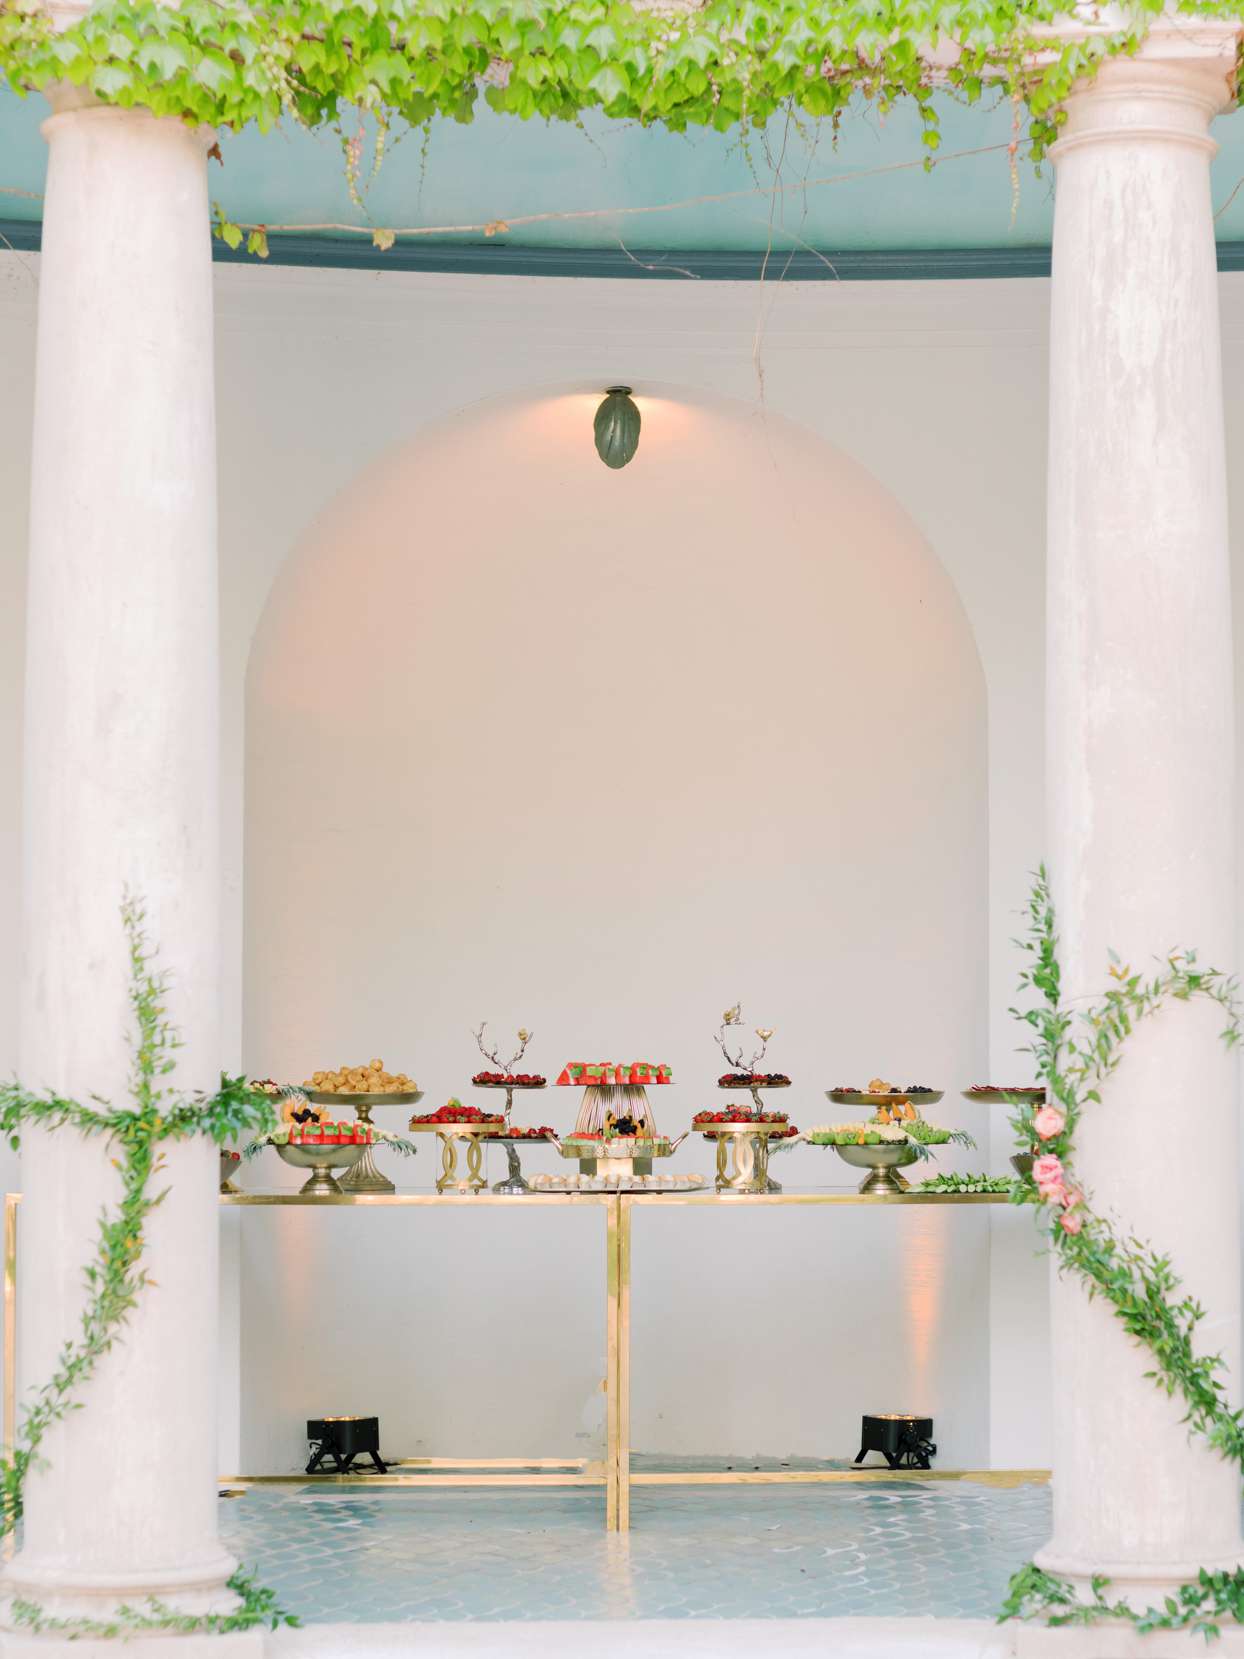 gold trimmed tables topped with various foods